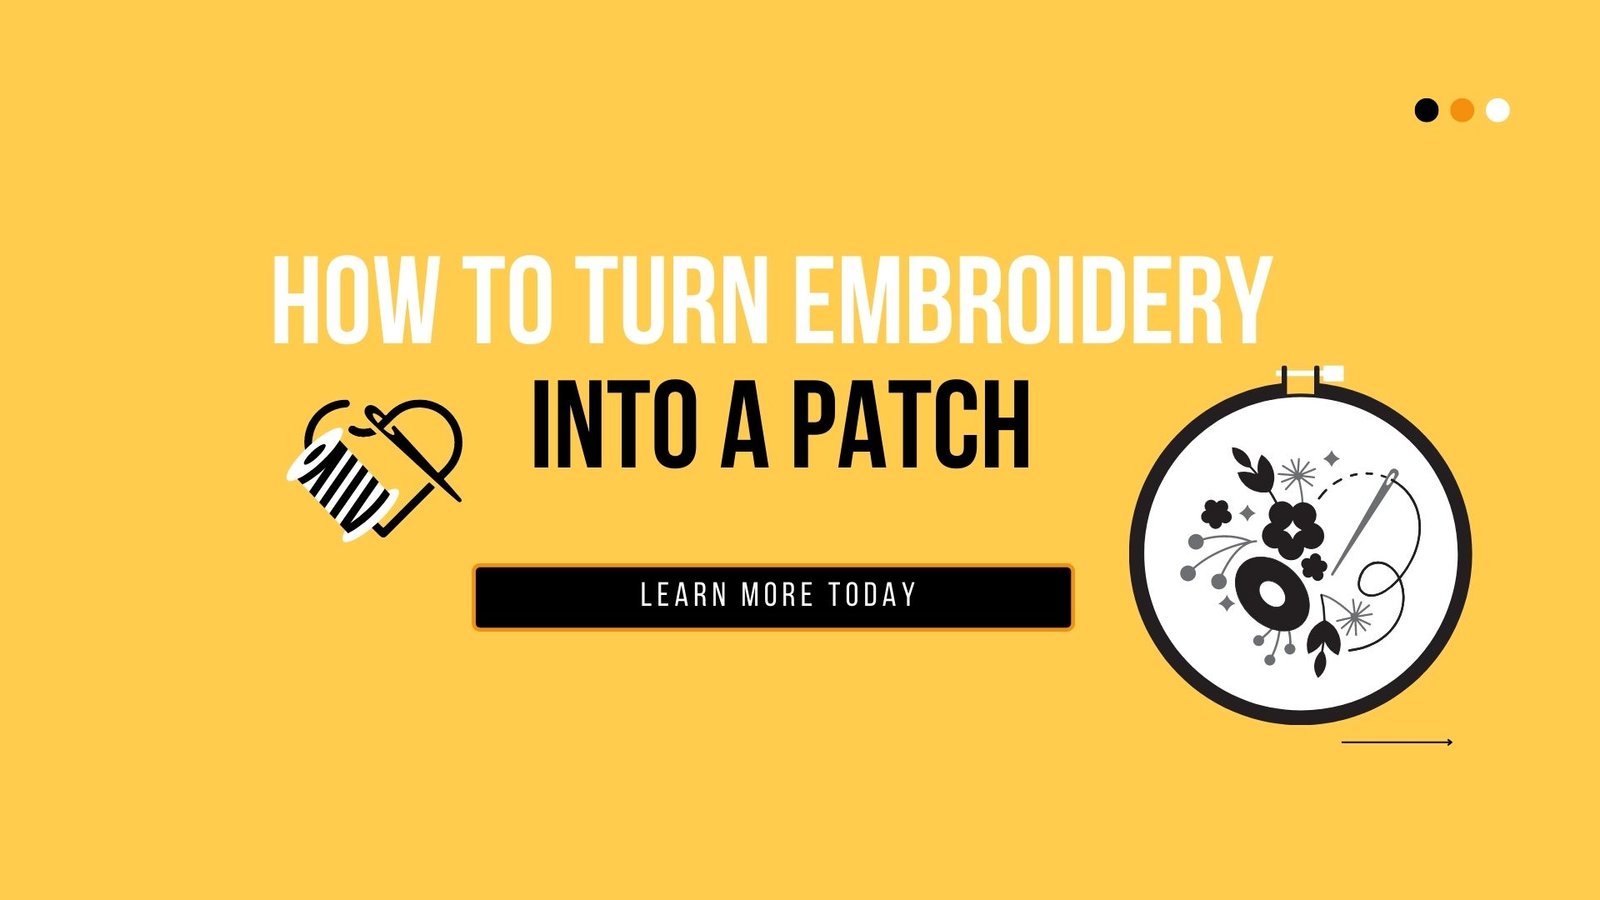 How to Turn Embroidery Into a Patch